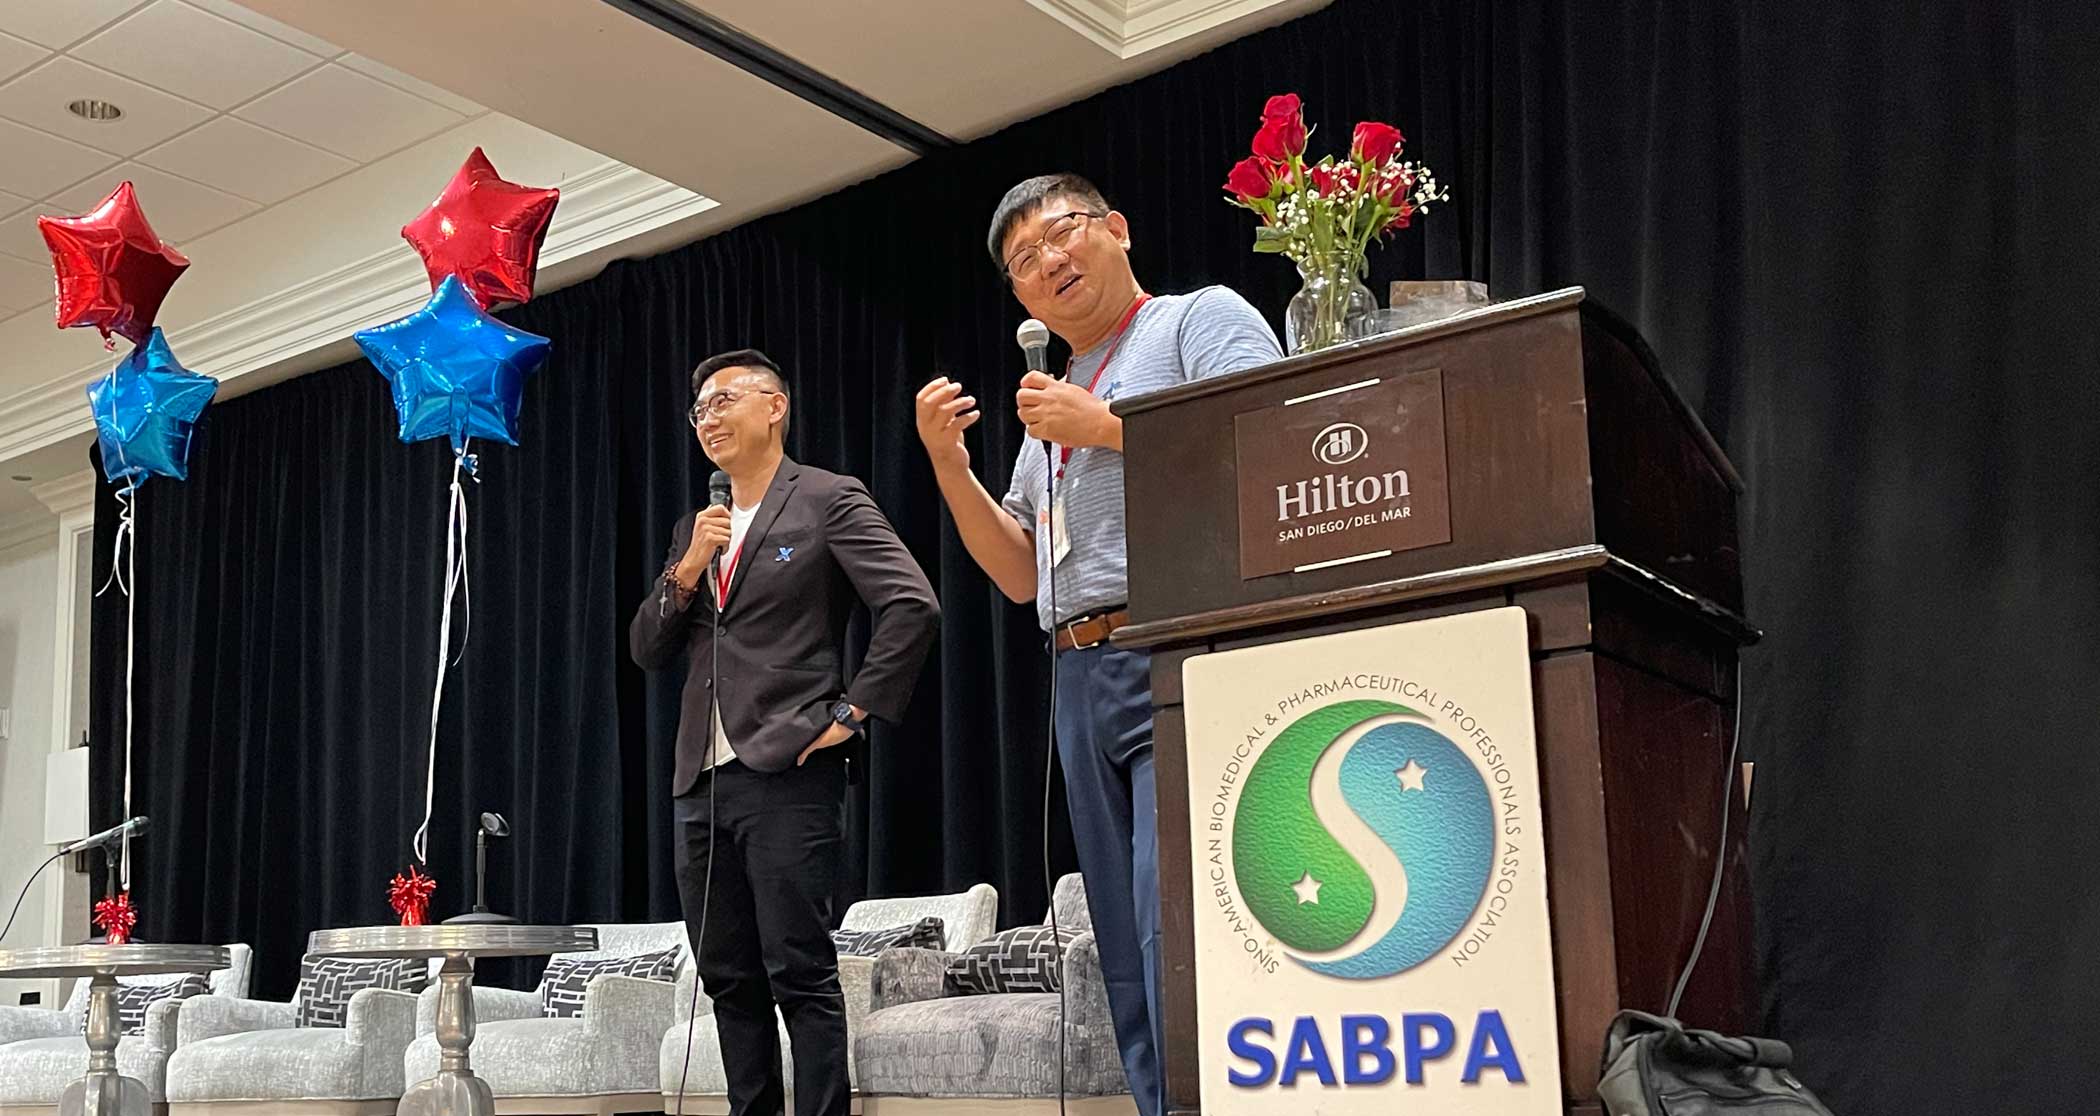 CEO & Founder of CorDx, Jeff Li at SABPA's event discussing innovation in biotechnology.